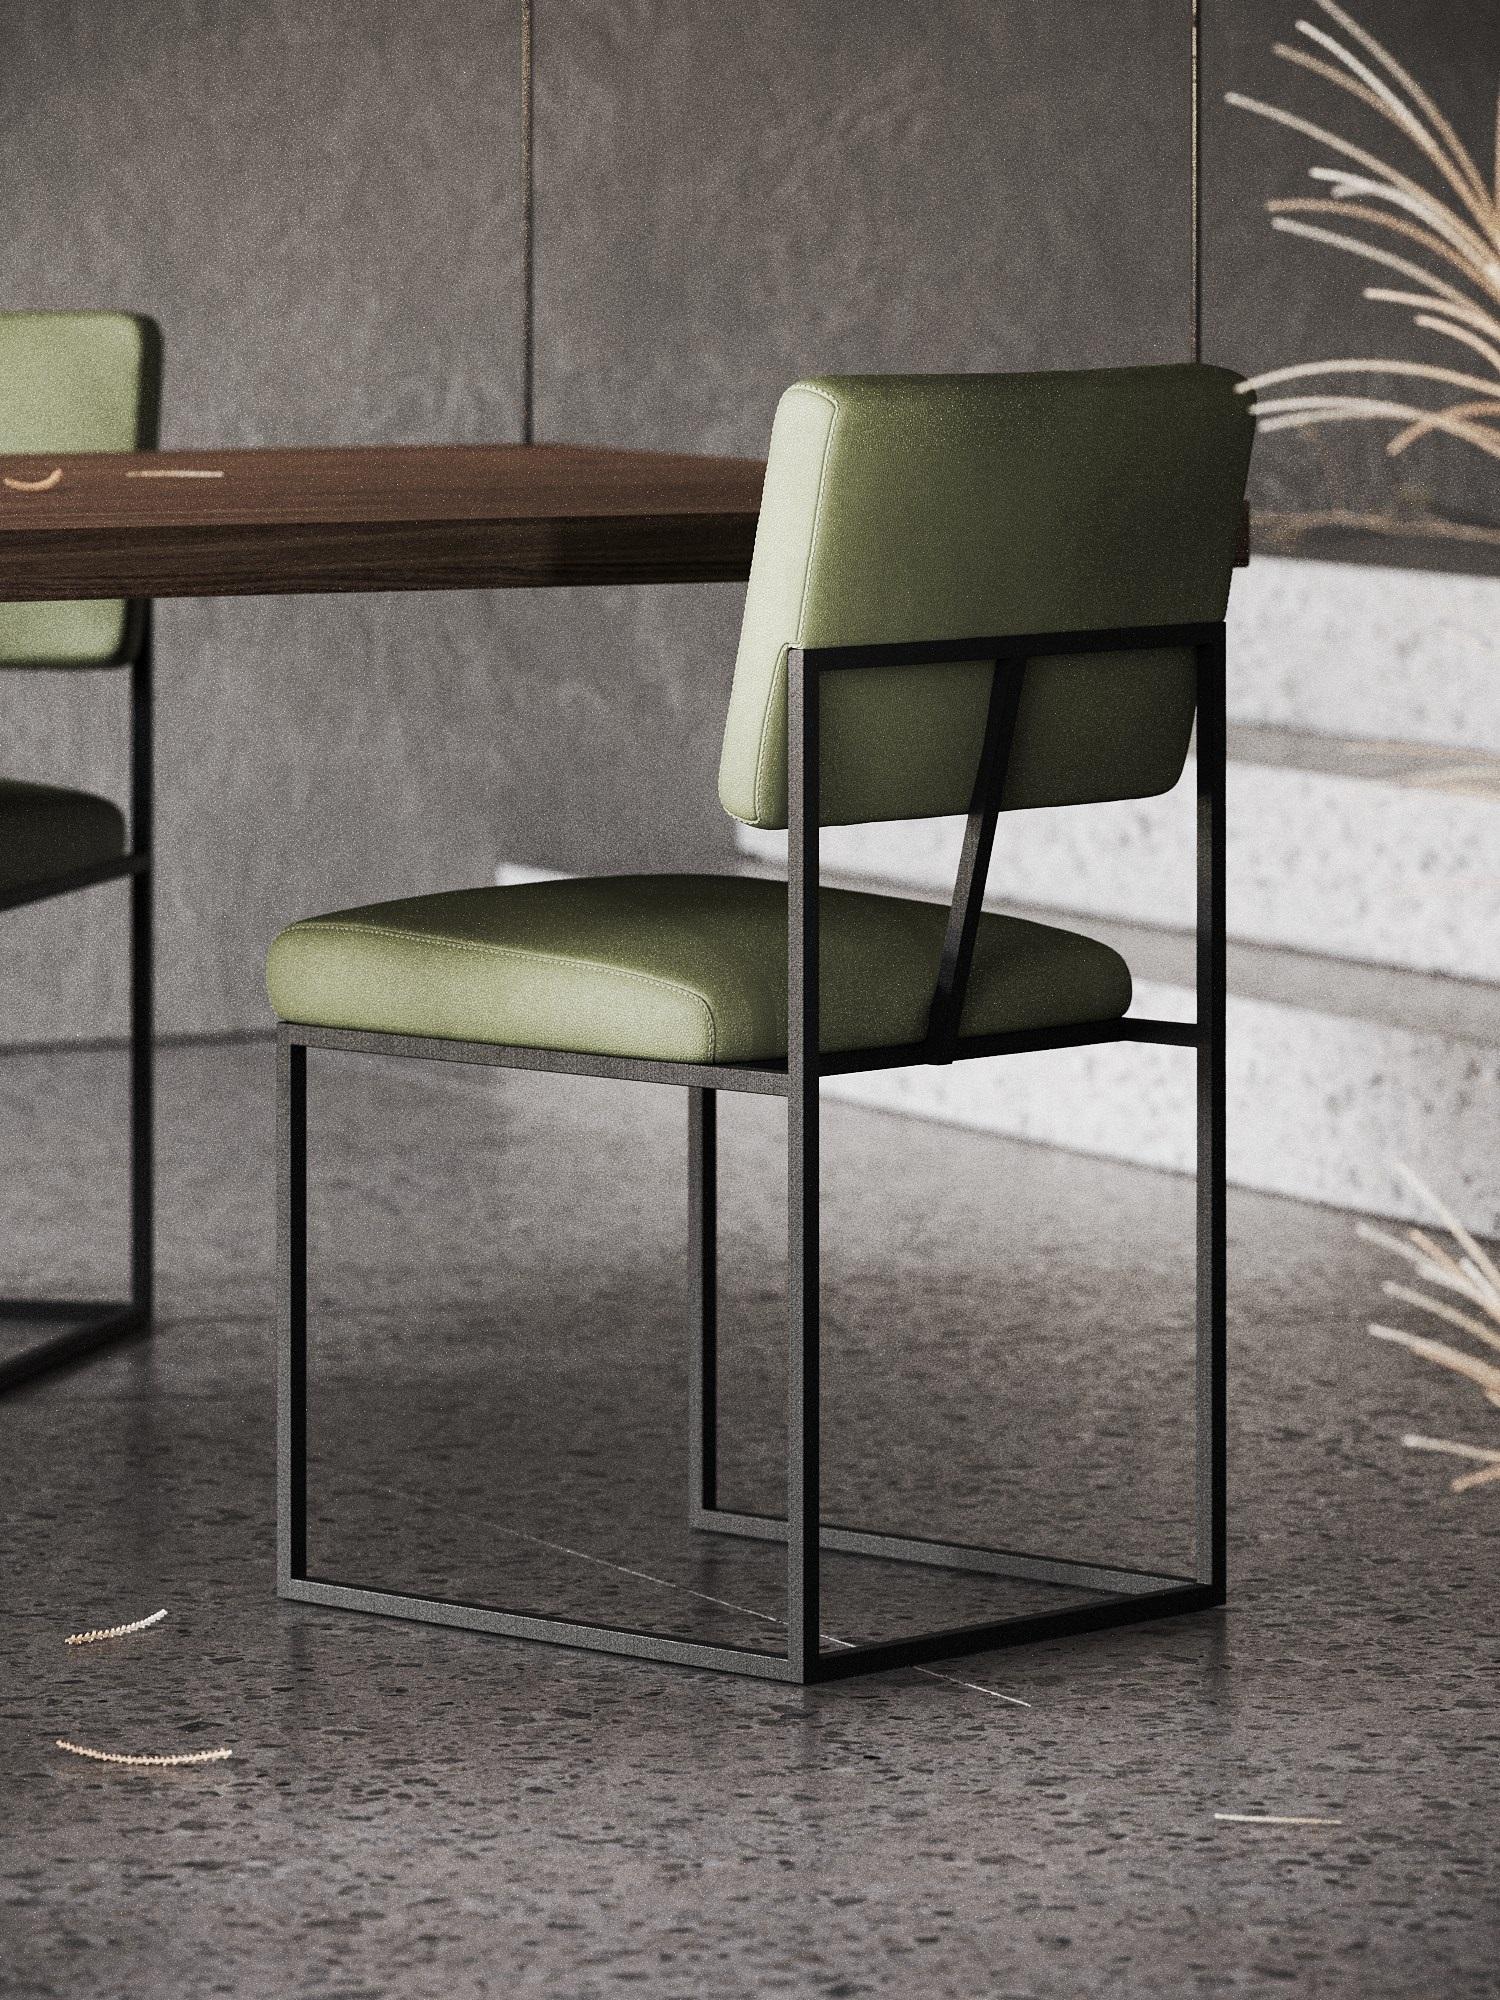 Modern Contemporary Dining Chair Inspired by Minimalist Design